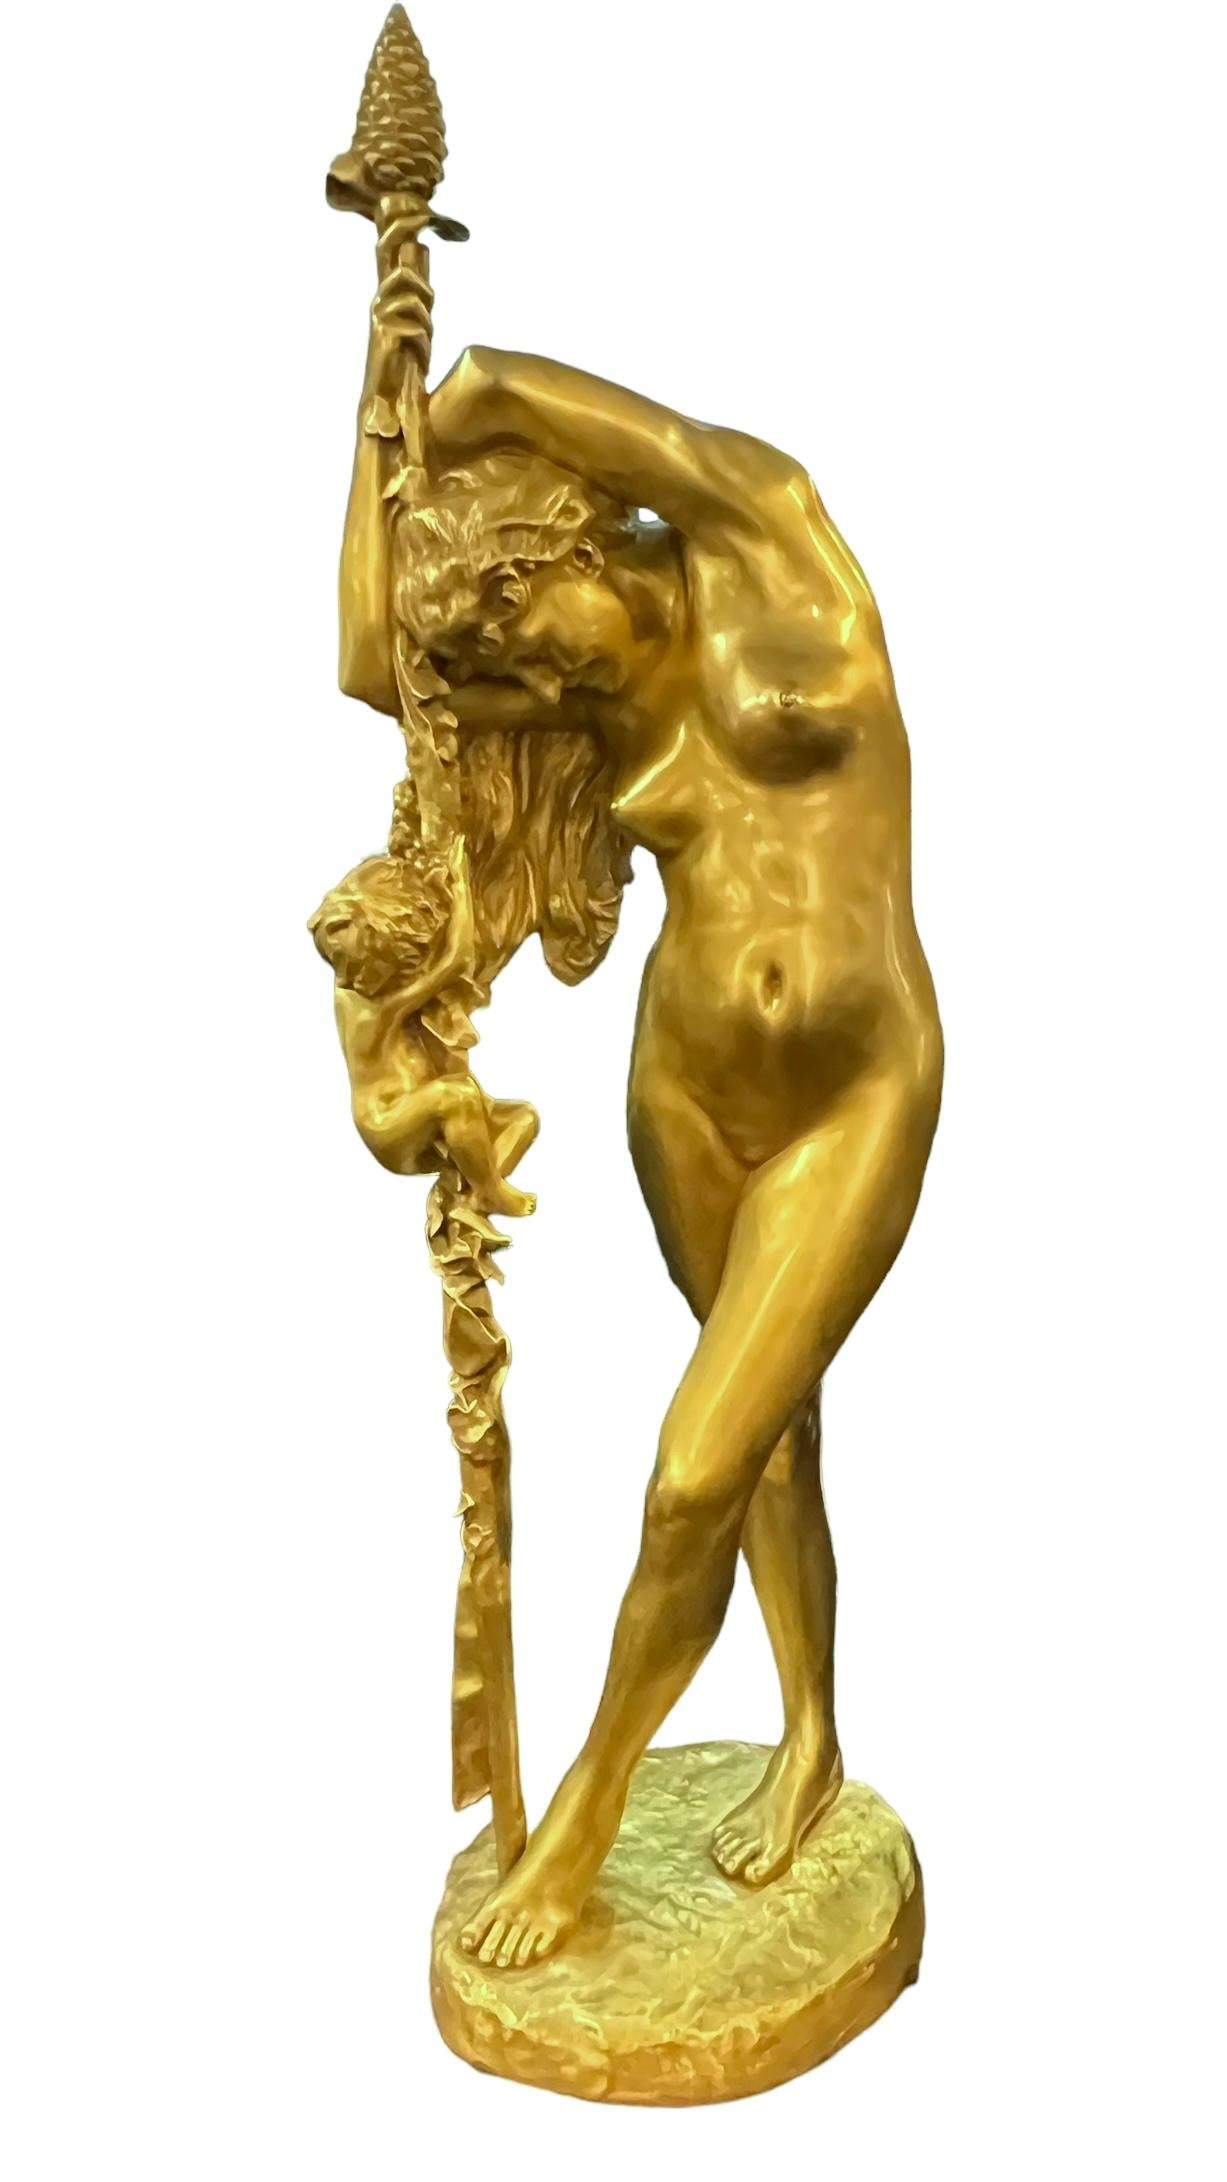 Our very large gilt bronze figure by Jean-Leon Gerome (1824-1904) depicts Venus holding and leaning upon a Dionysian staff with pine cone finial as Cupid clambers up the staff.  Based marked JL GEROME.